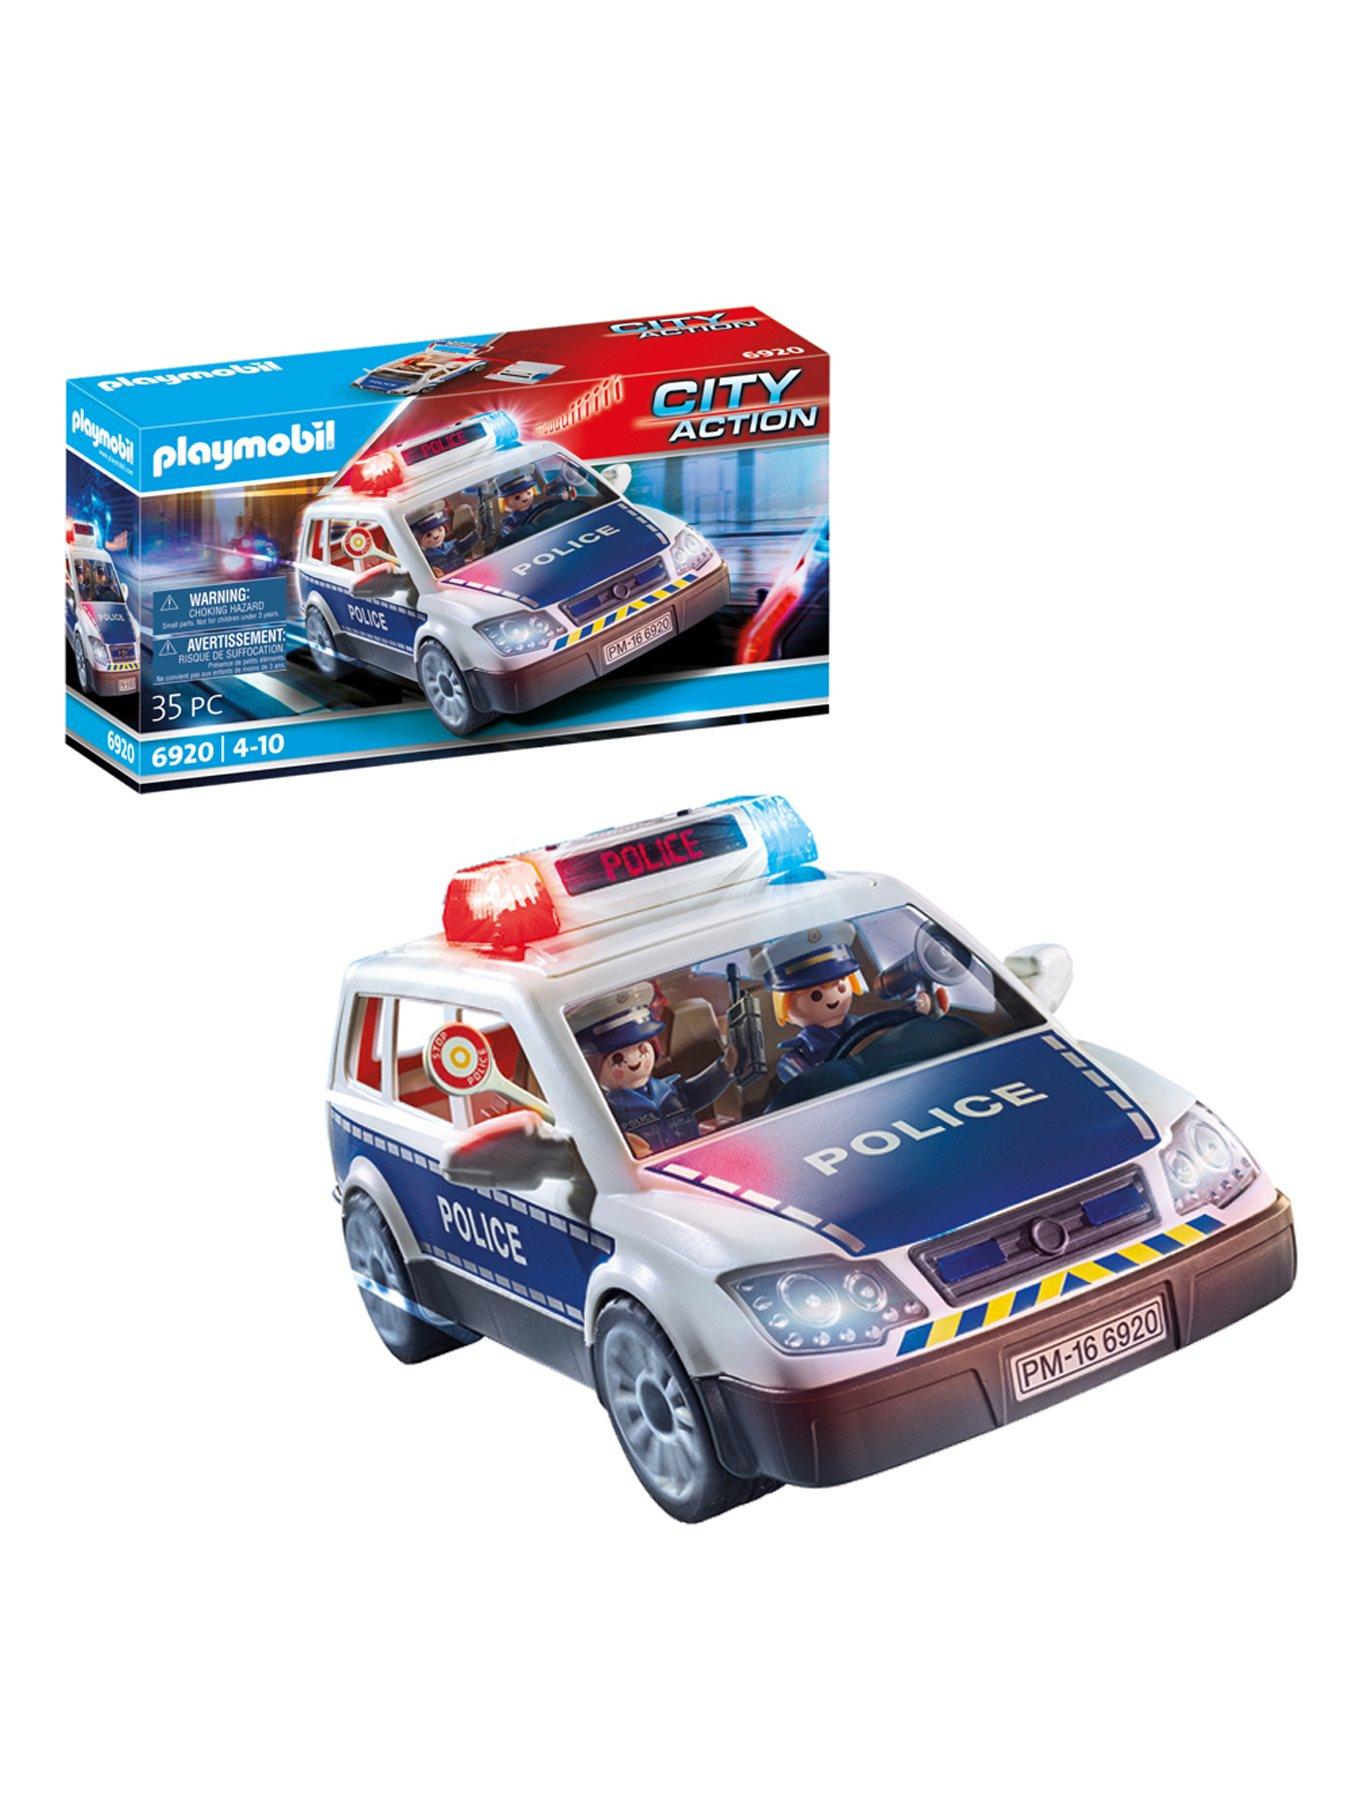 Playmobil 6920 City Action Squad Car with Lights and Sound | very.co.uk